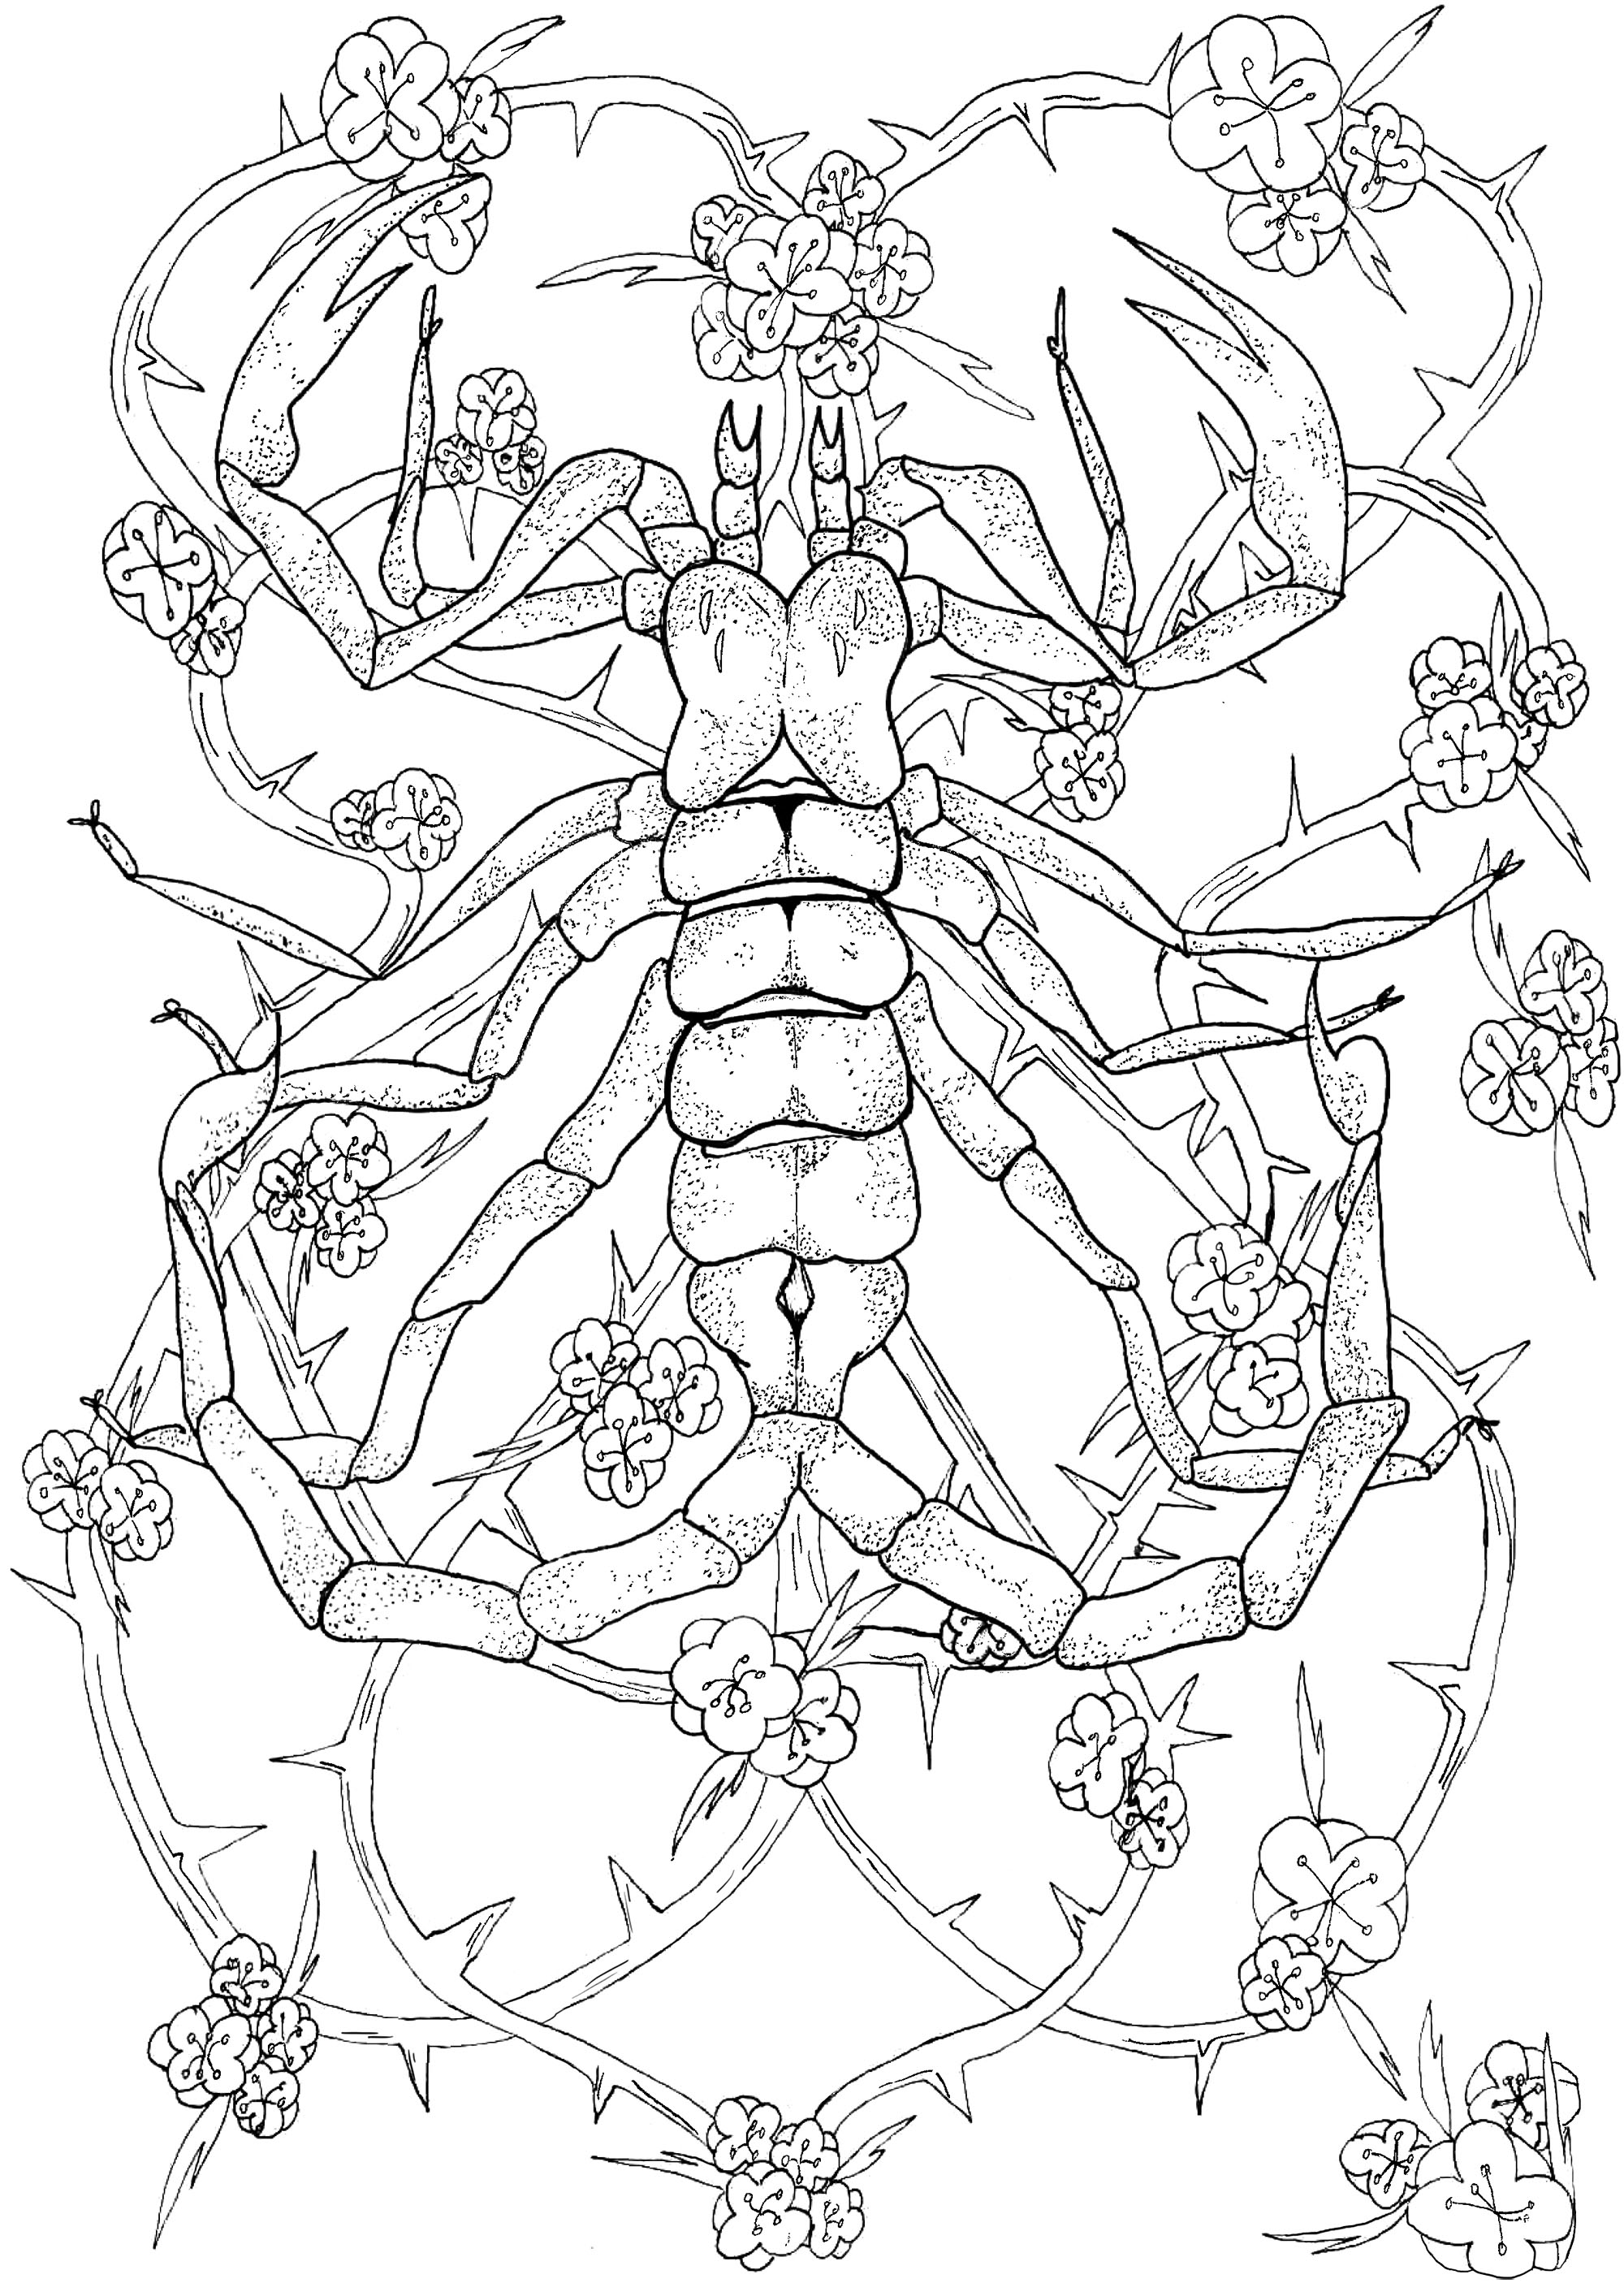 Scorpion - Other animals Adult Coloring Pages